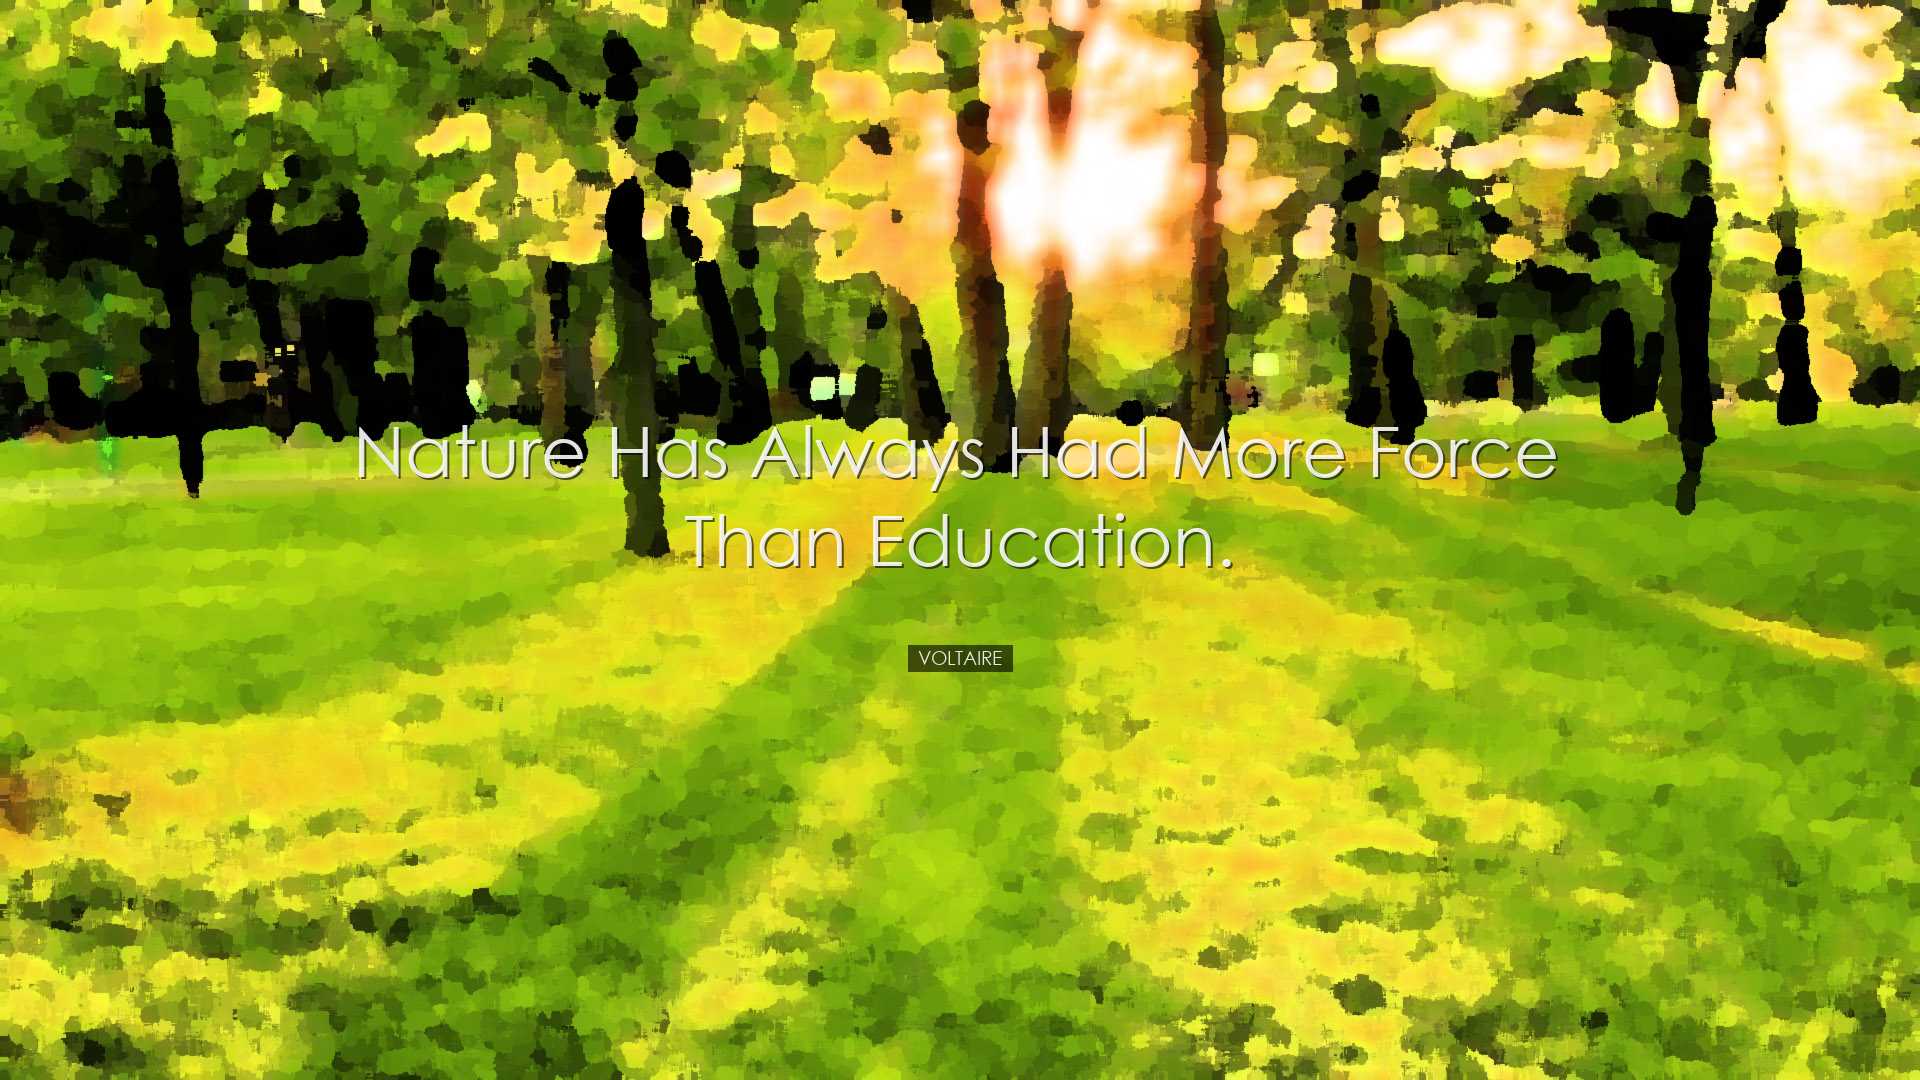 Nature has always had more force than education. - Voltaire